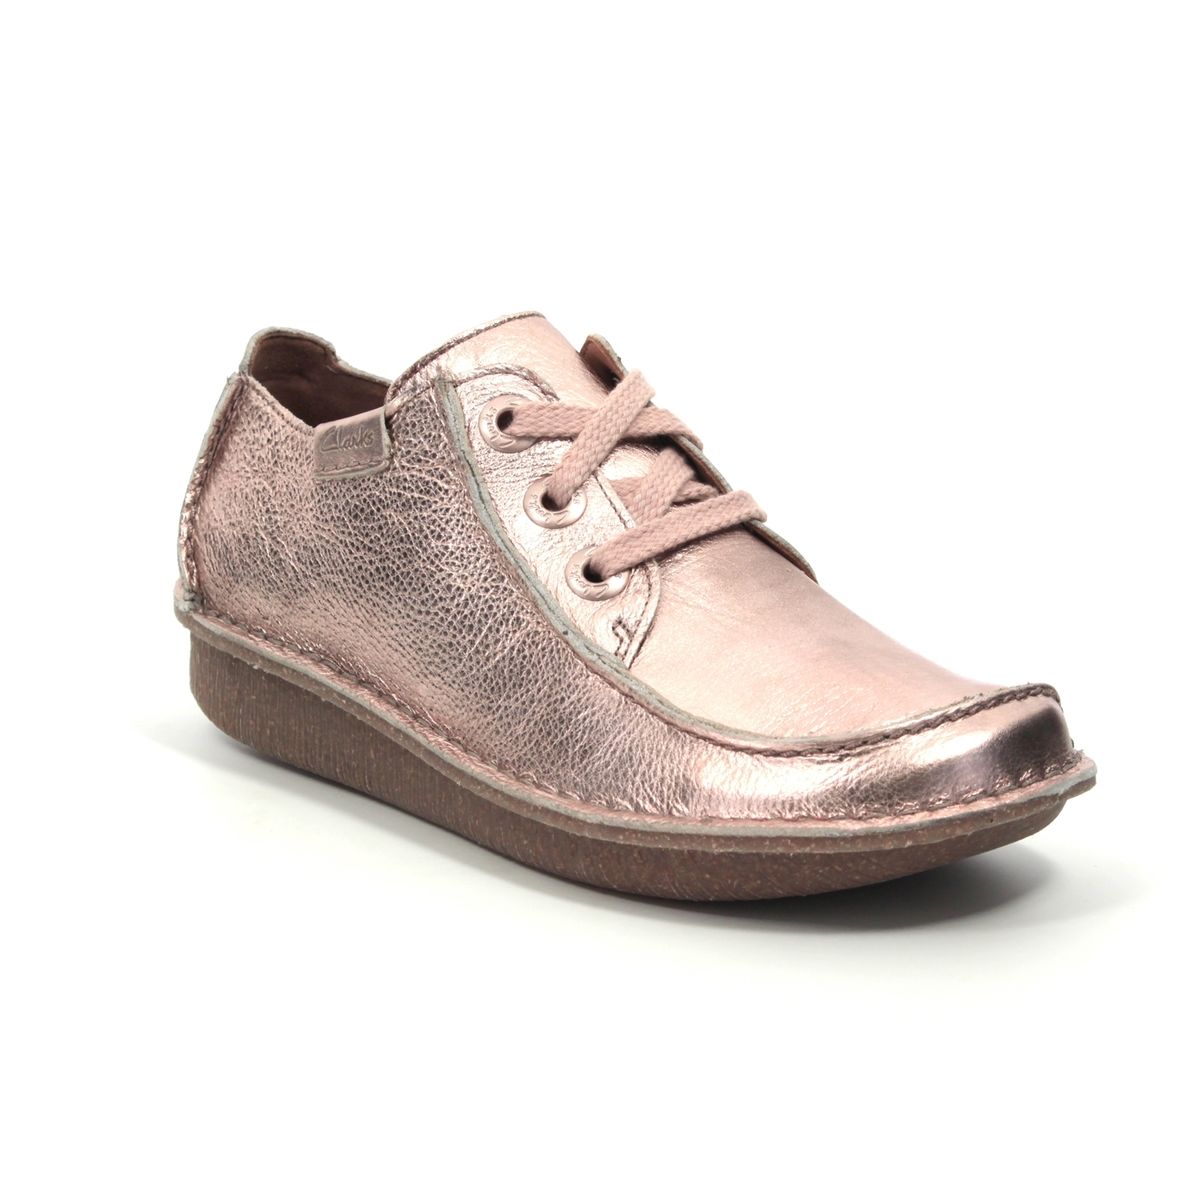 clarks rose gold shoes